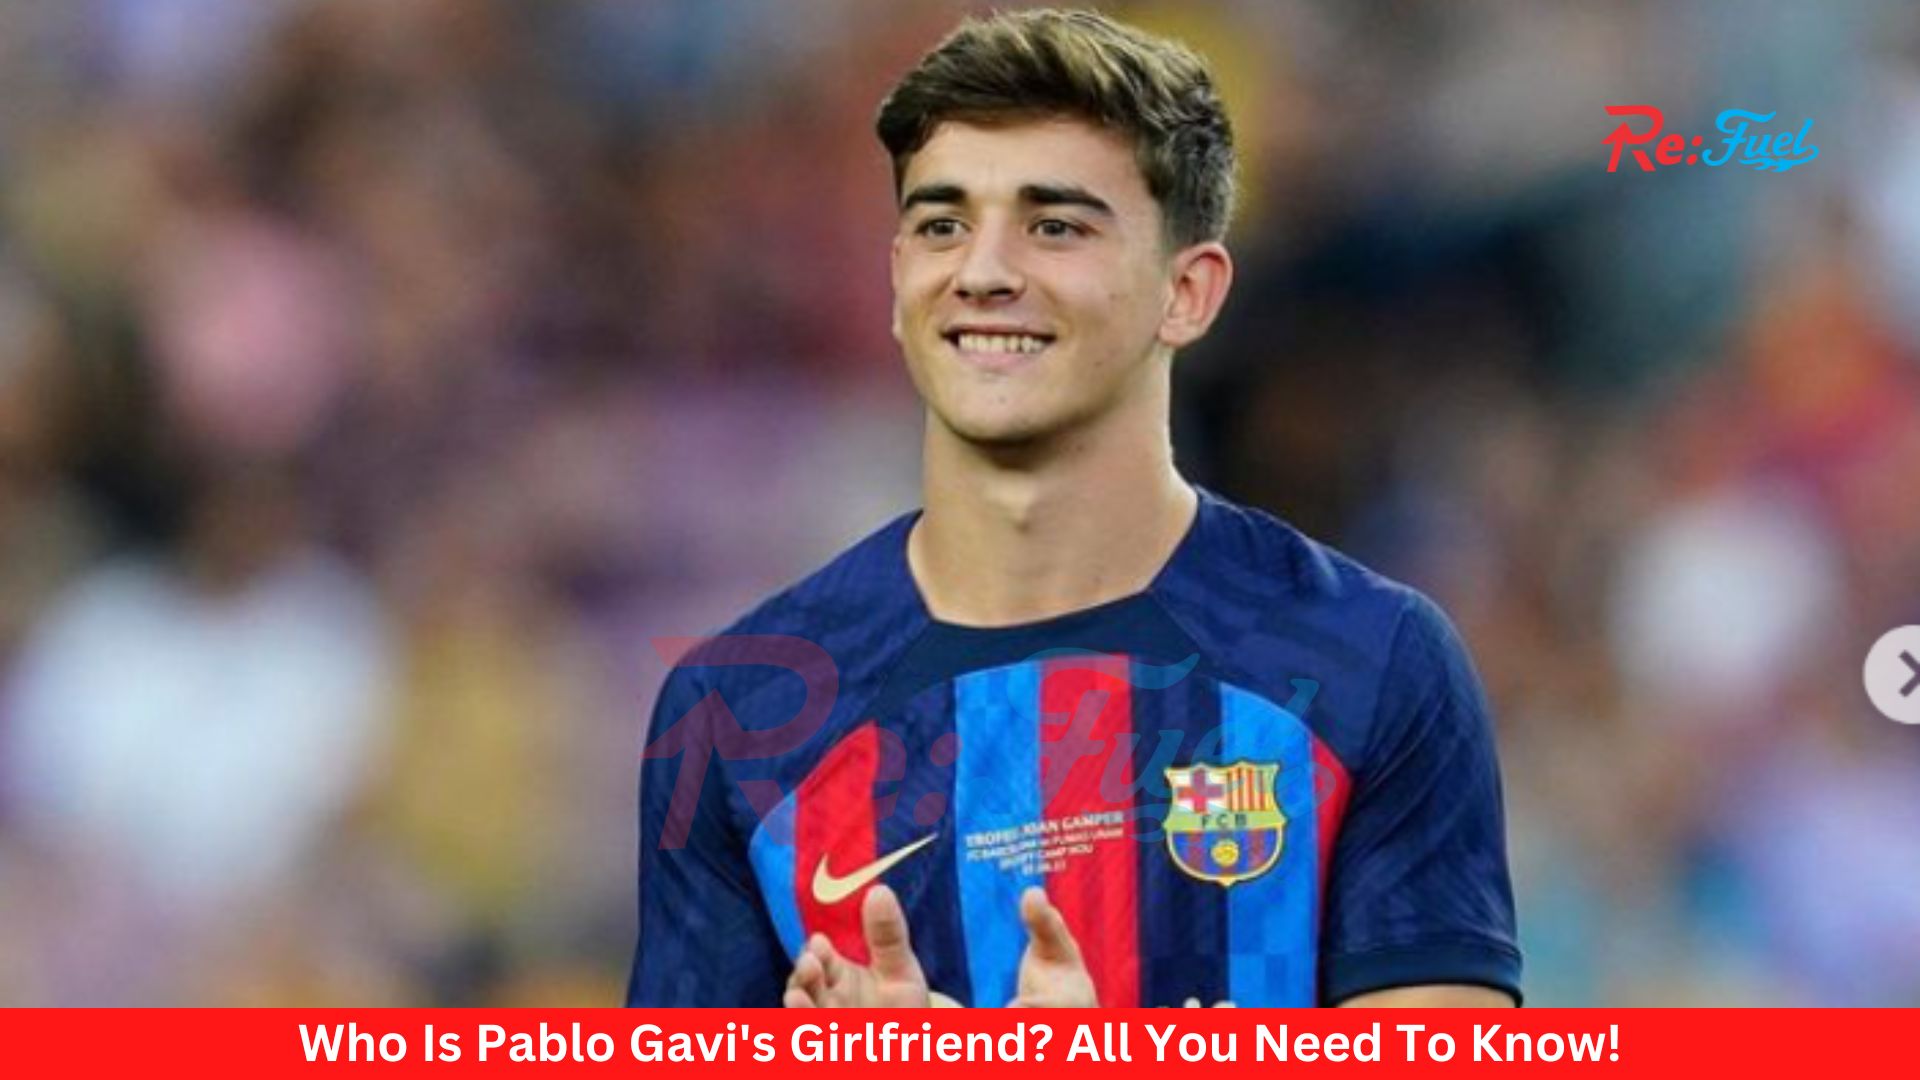 Who Is Pablo Gavi's Girlfriend? All You Need To Know!